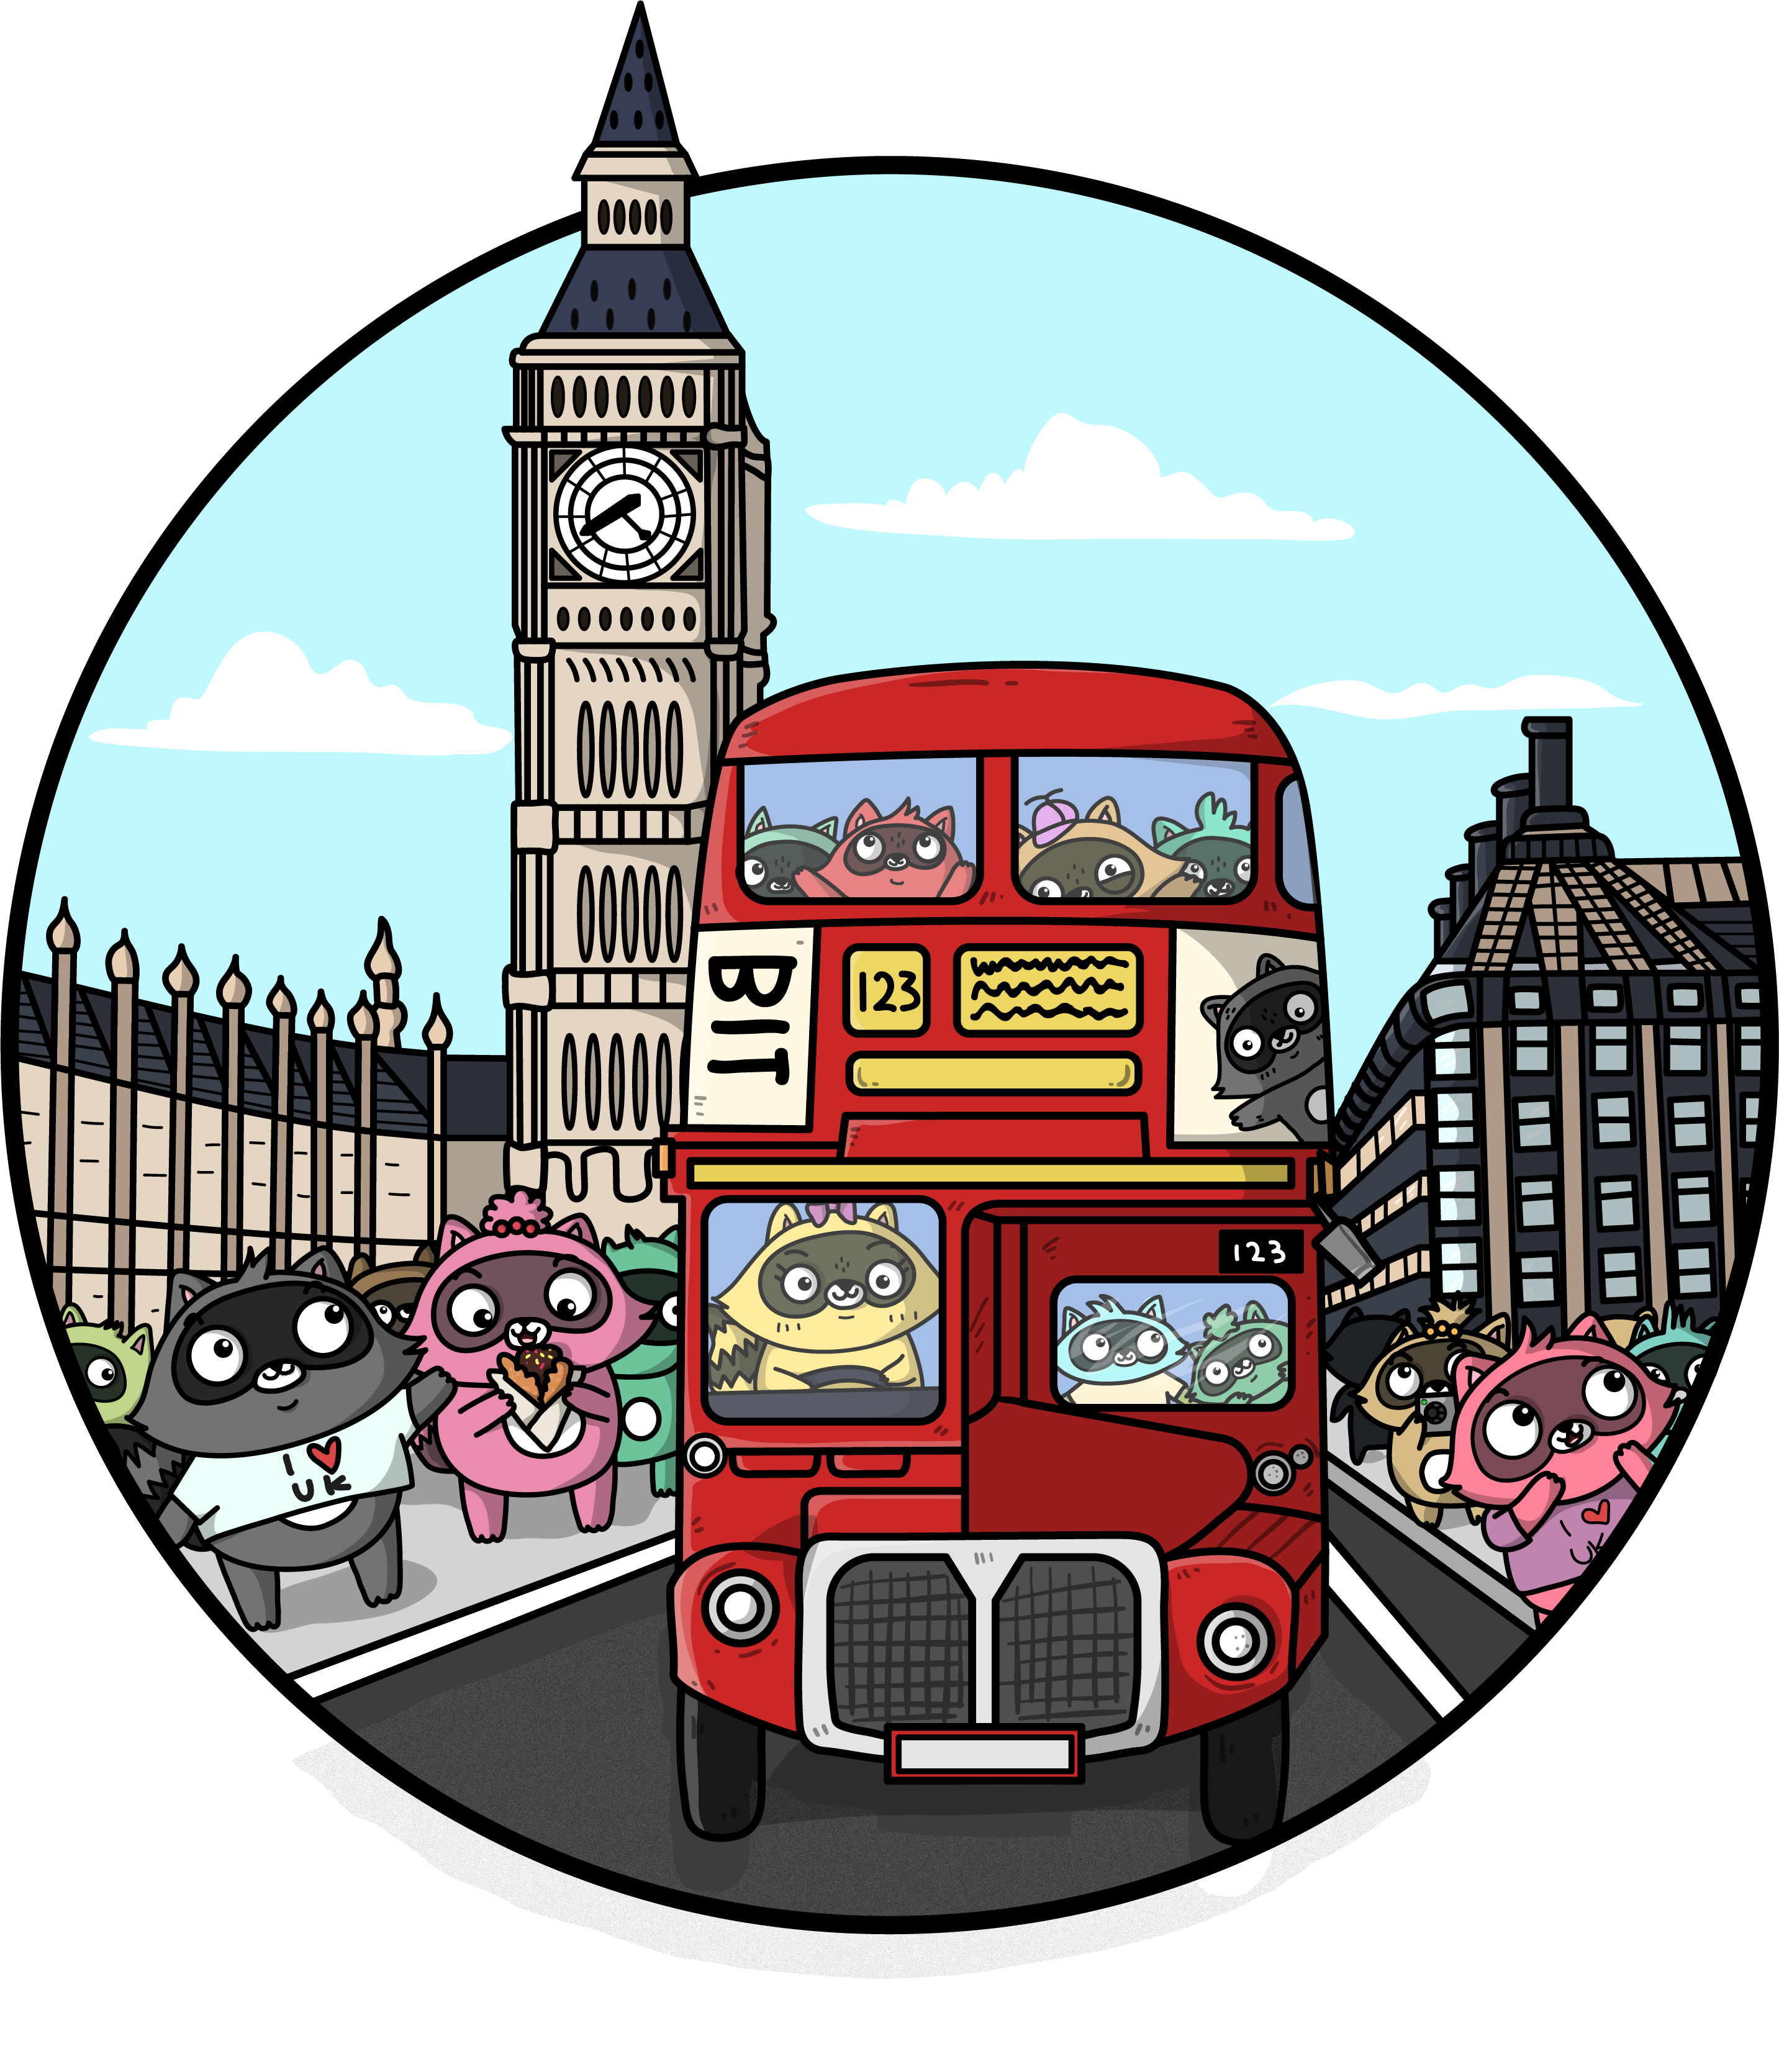 A drawing of Bit the Raccoon in London, featuring a red double decker bus and Big Ben.